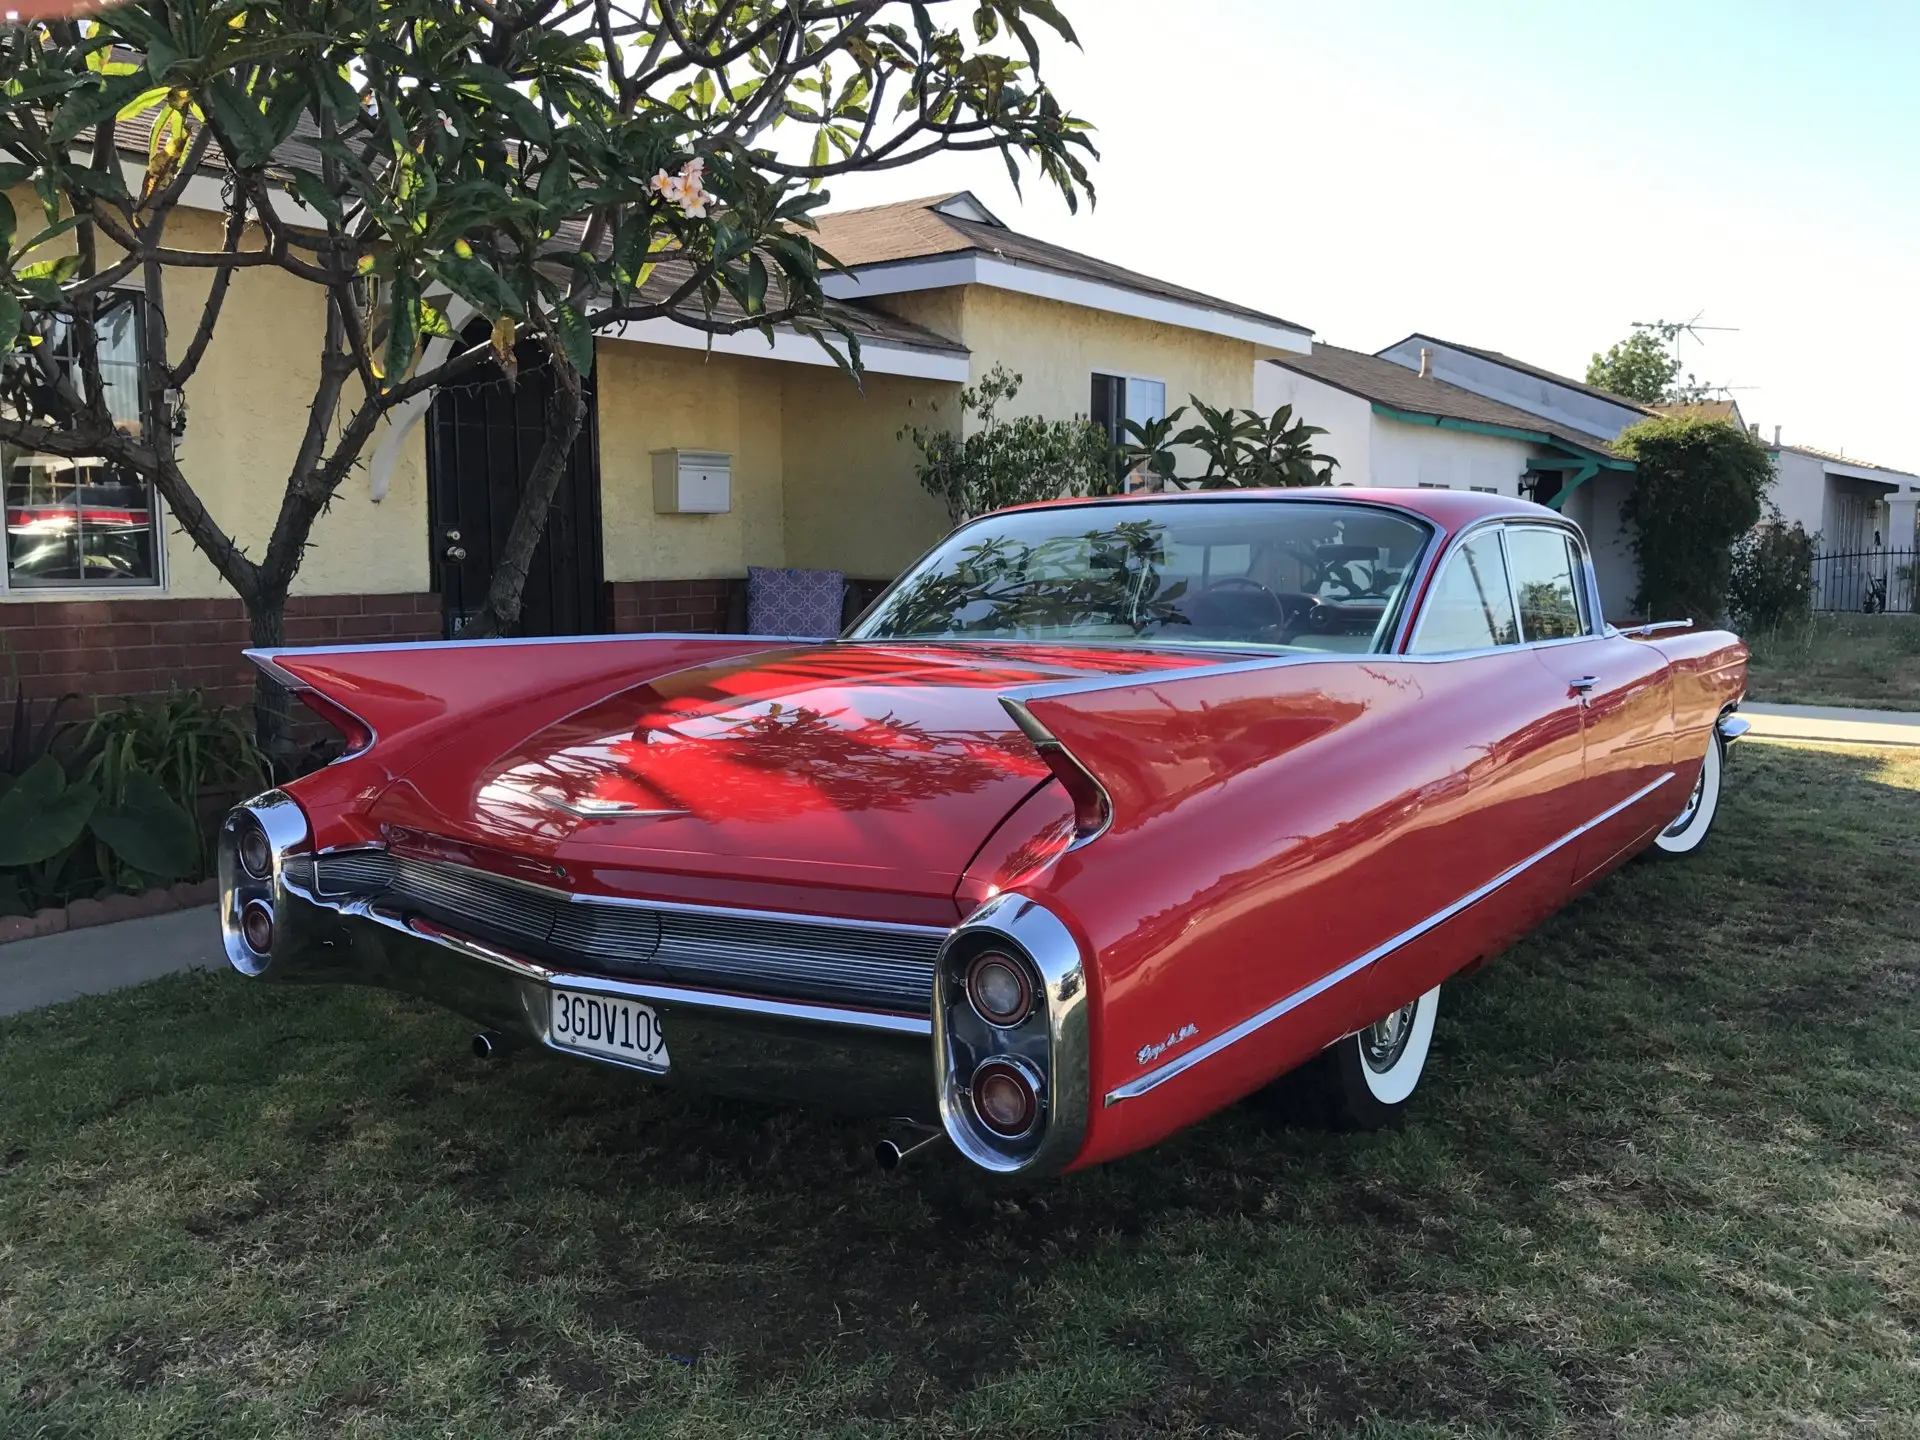 The Iconic 1960 Cadillac Coupe Deville A Classic Beauty